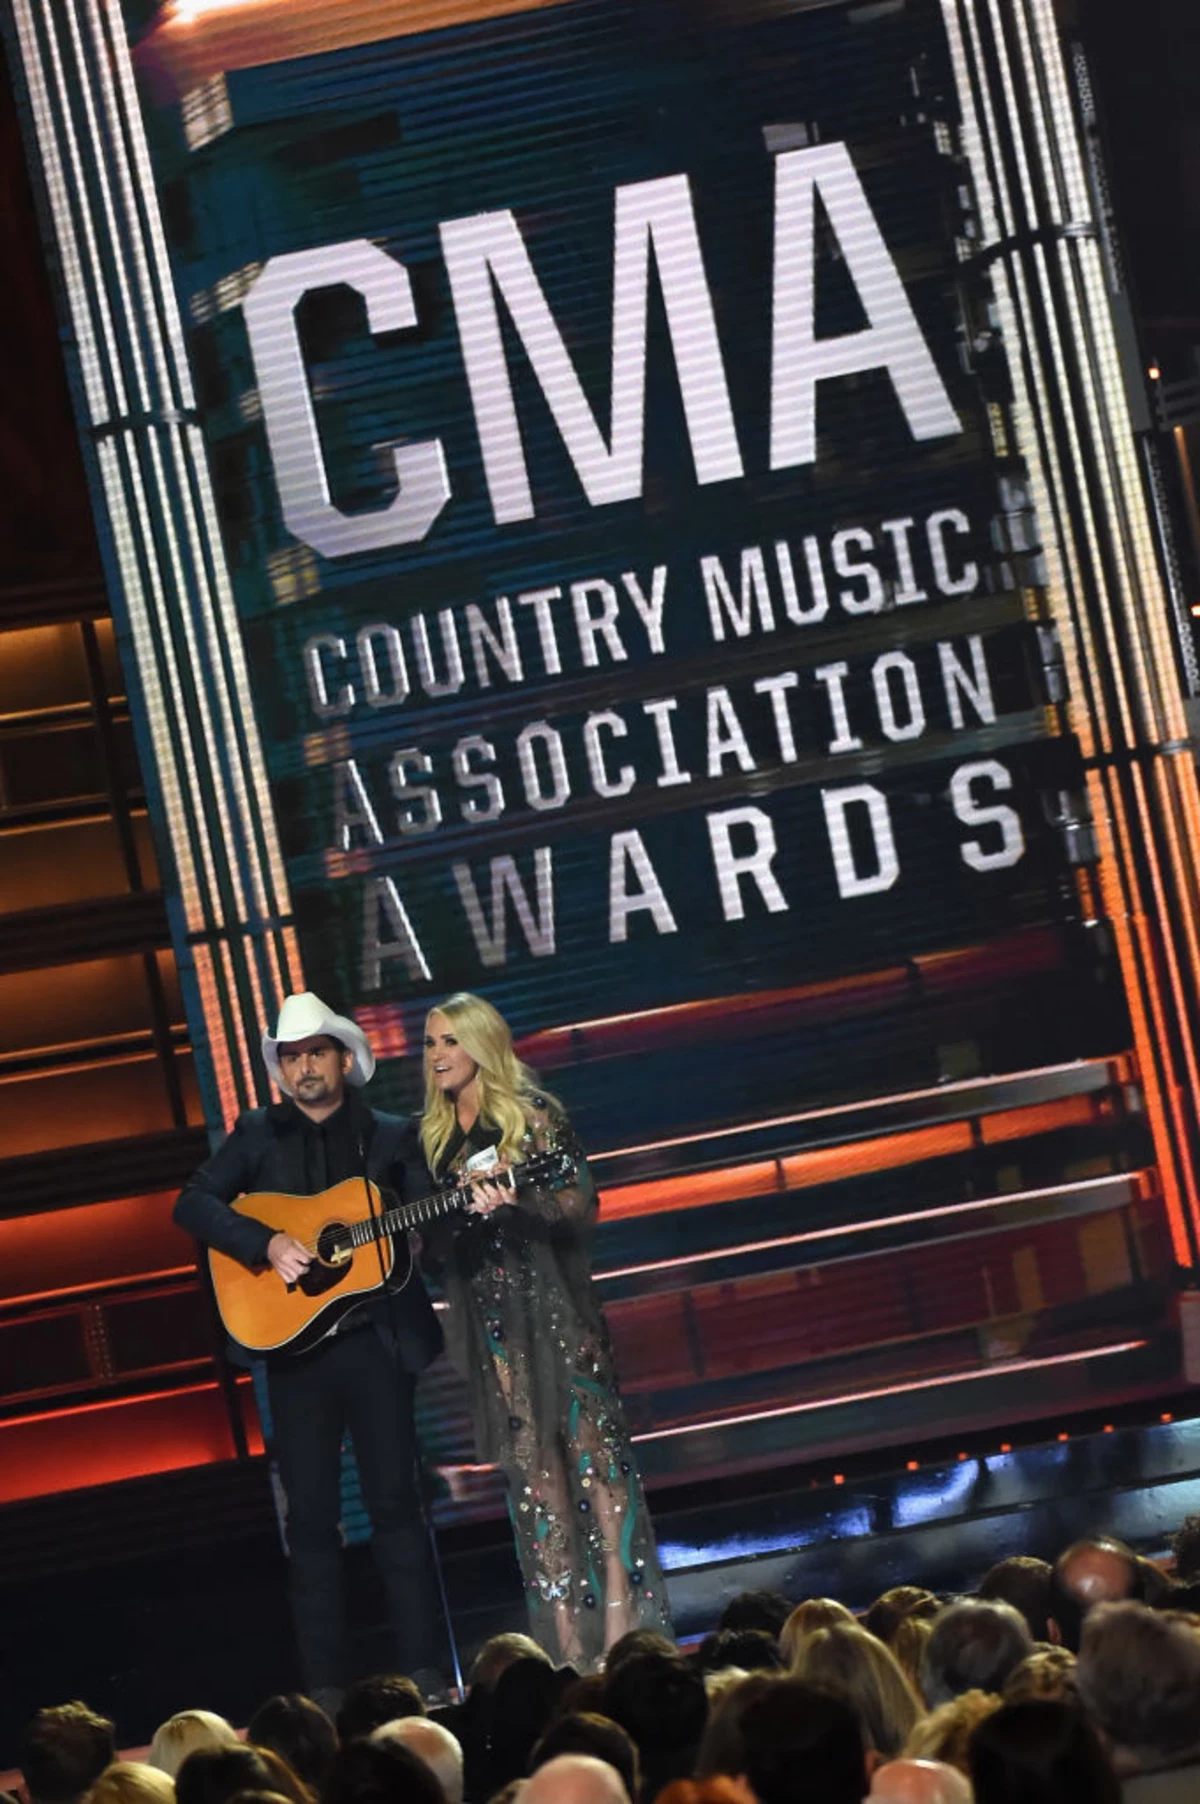 VOTE Who Will Win the CMA Award for Album of the Year?